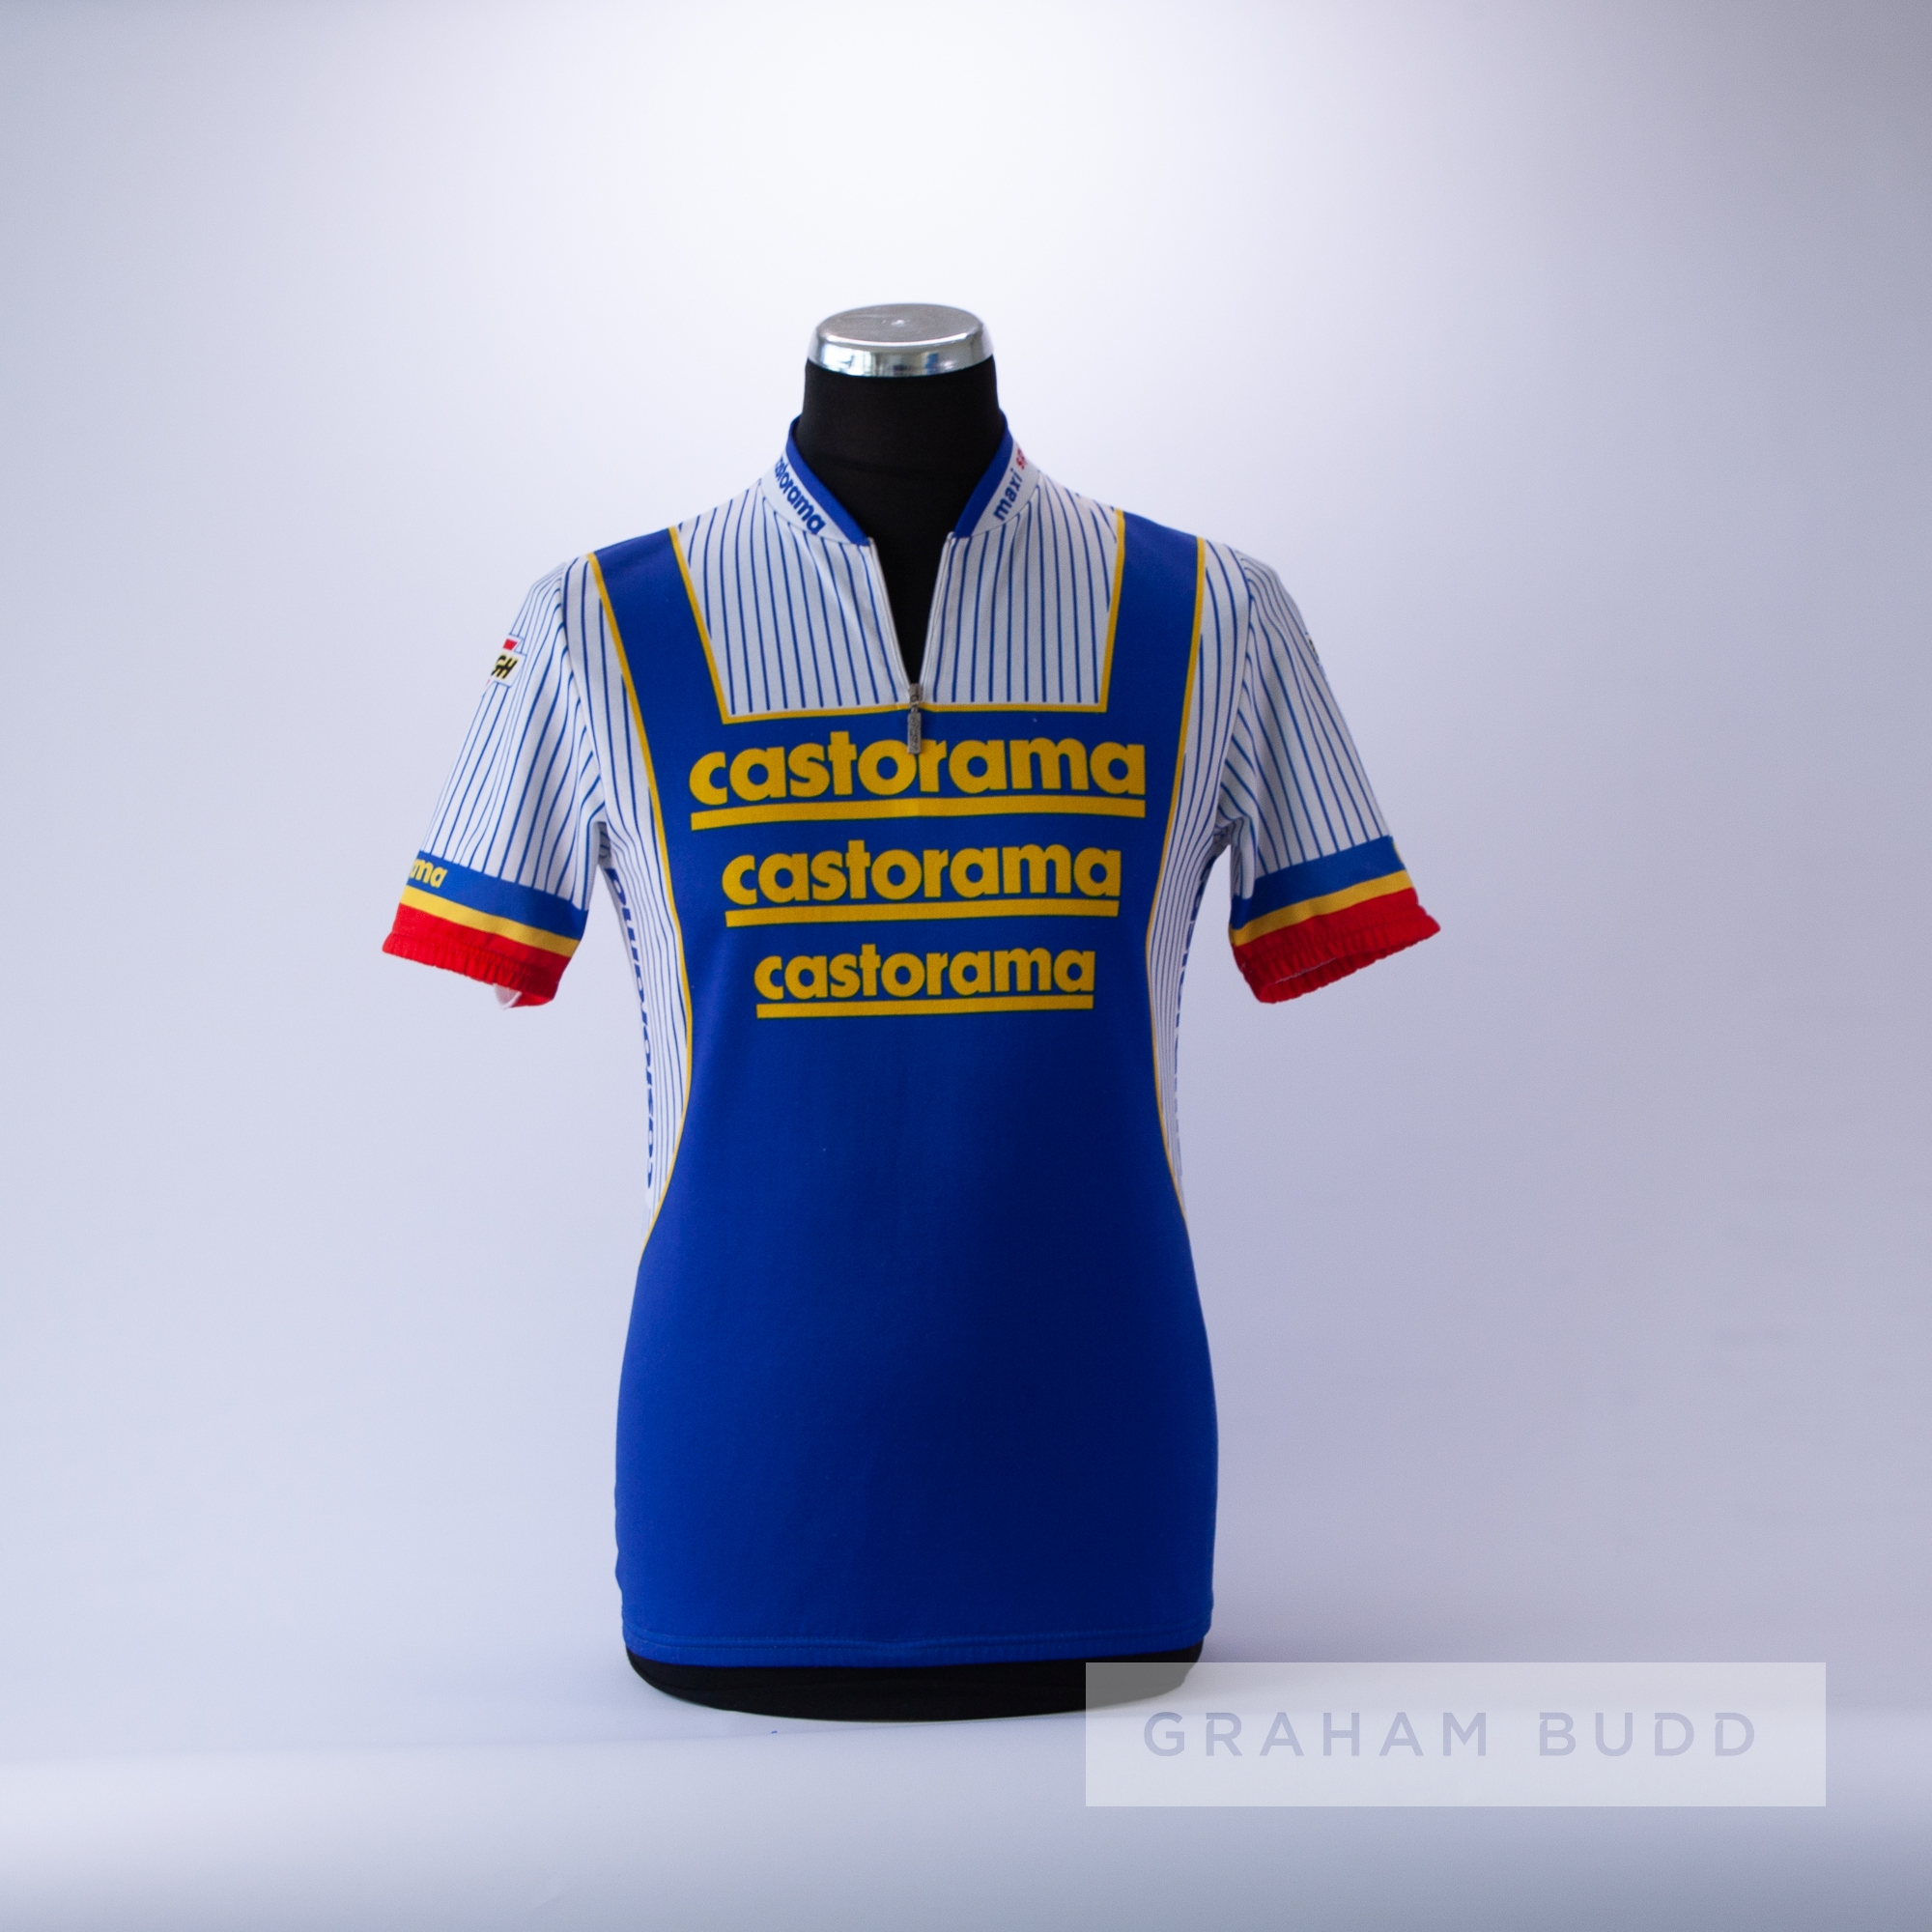 1990 white, blue, red and yellow Castorama Raleigh Classic Cycling team race jersey, scarce, - Image 3 of 4